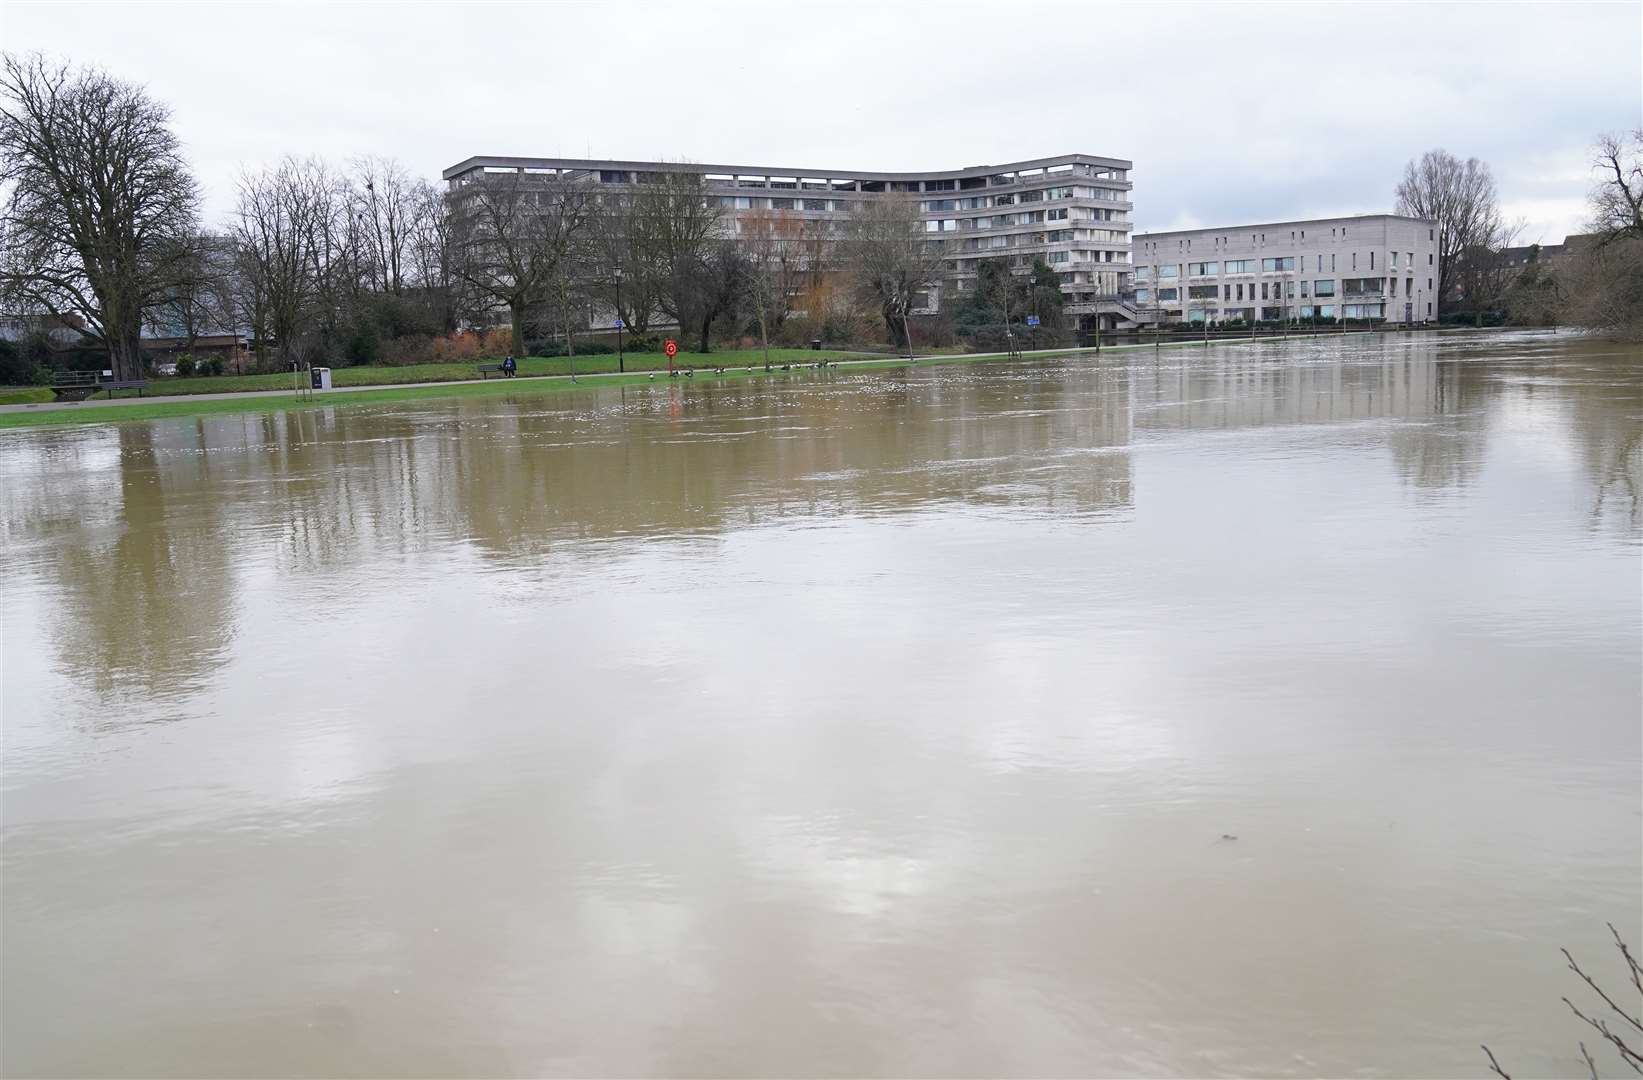 The River Great Ouse in Bedford, which has burst its banks following heavy rainfall. (Stefan Rousseau/PA)